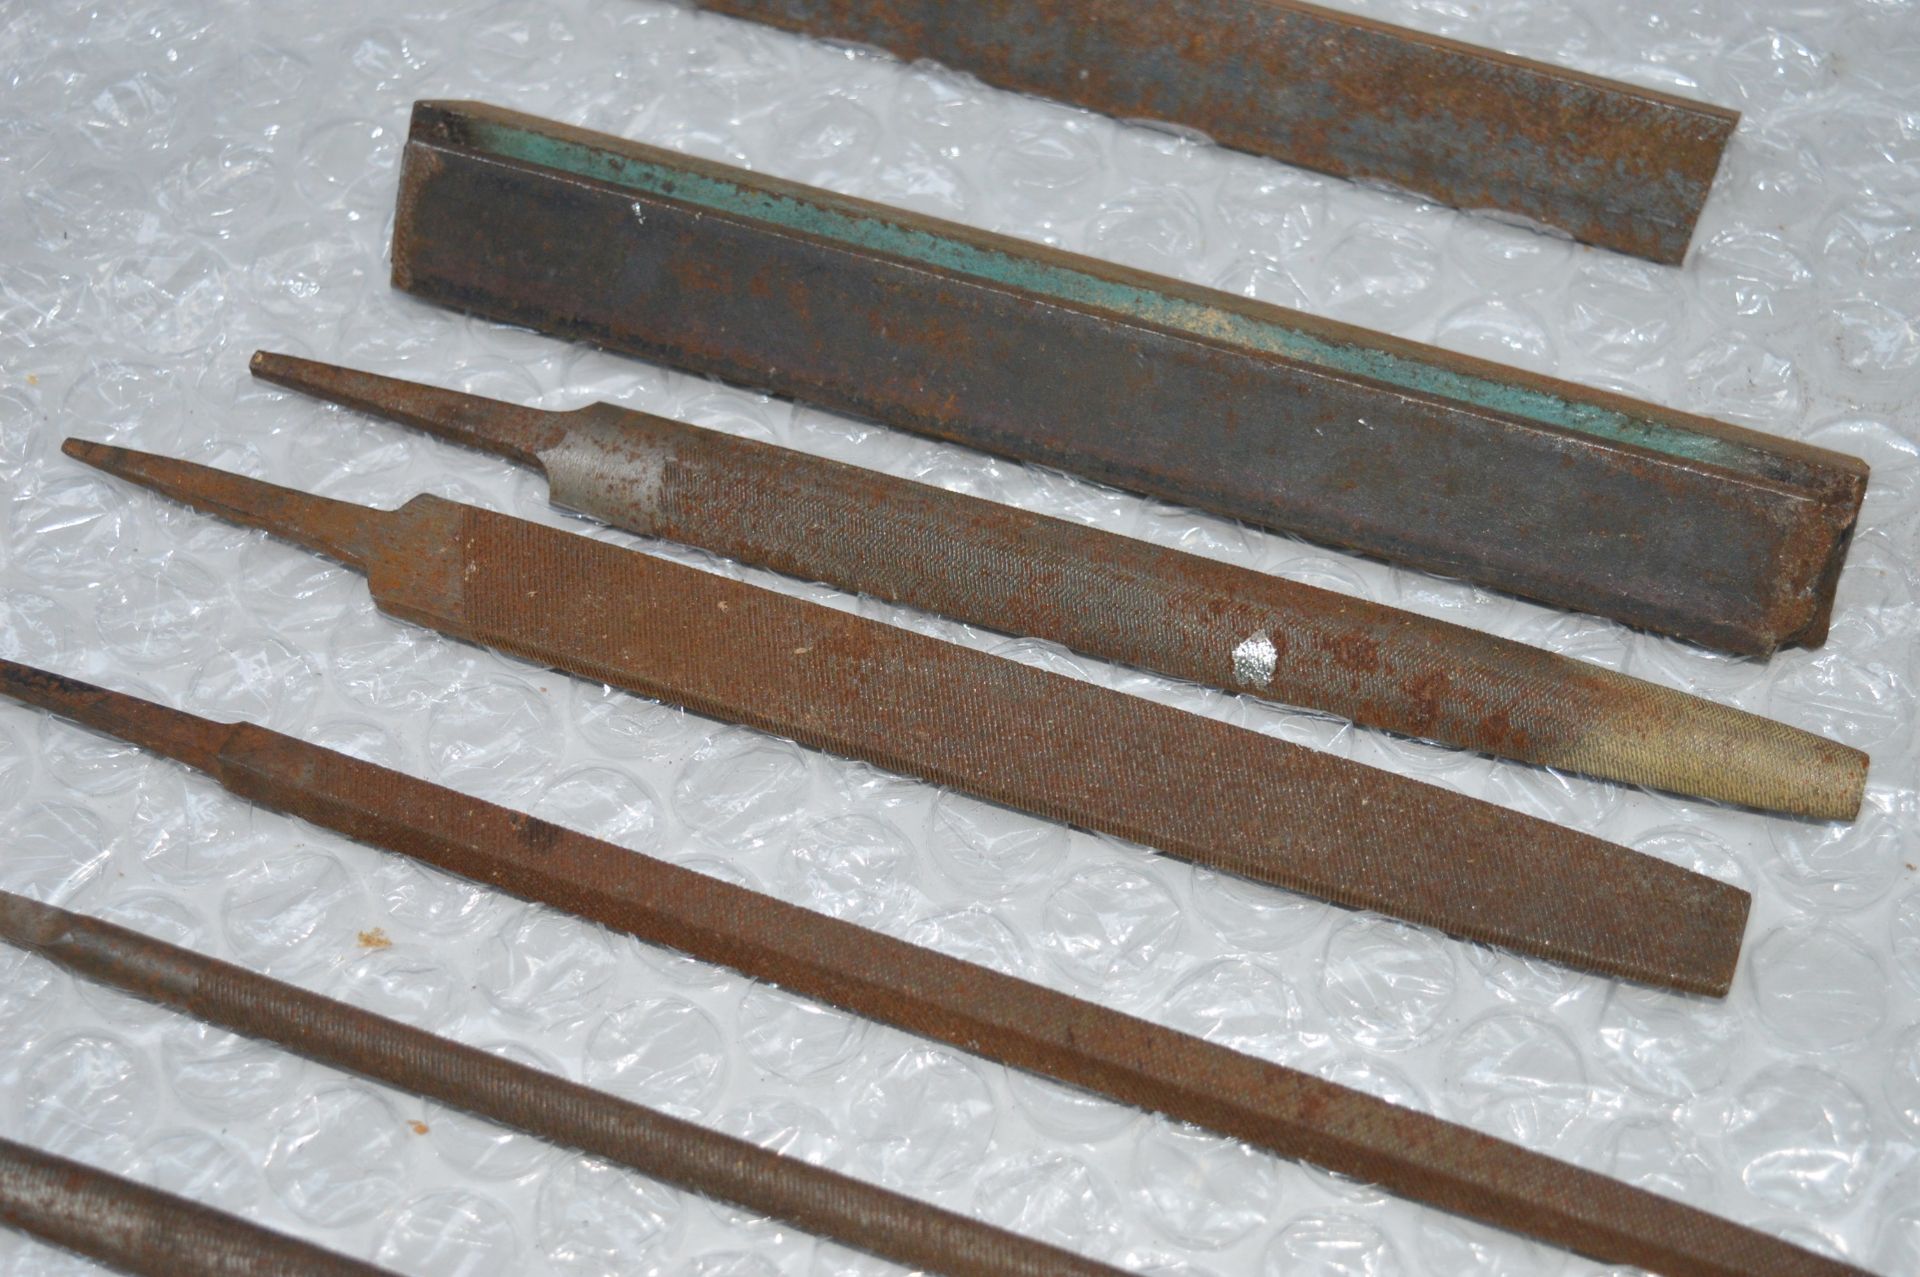 1 x Assorted Lot of Vintage Tools, Files, Rods and More - Includes More Than 30 Pieces Including - Image 8 of 22